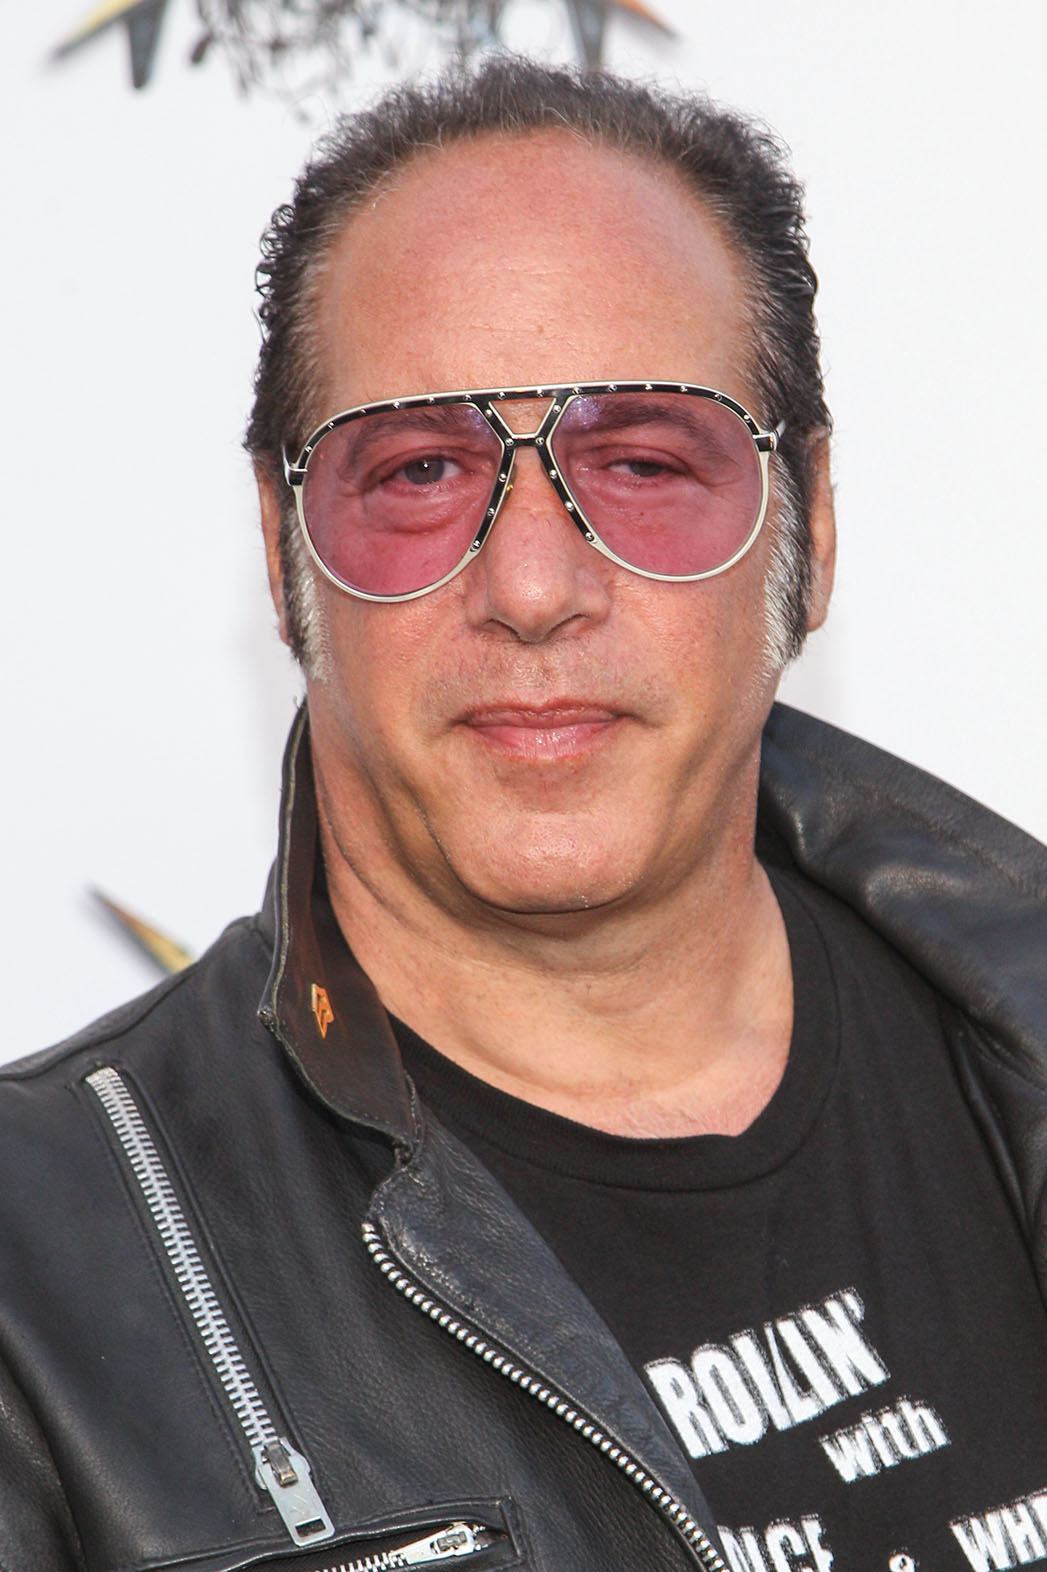 Andrew Dice Clay Goes Soft The Comedian on Family, James Franco and